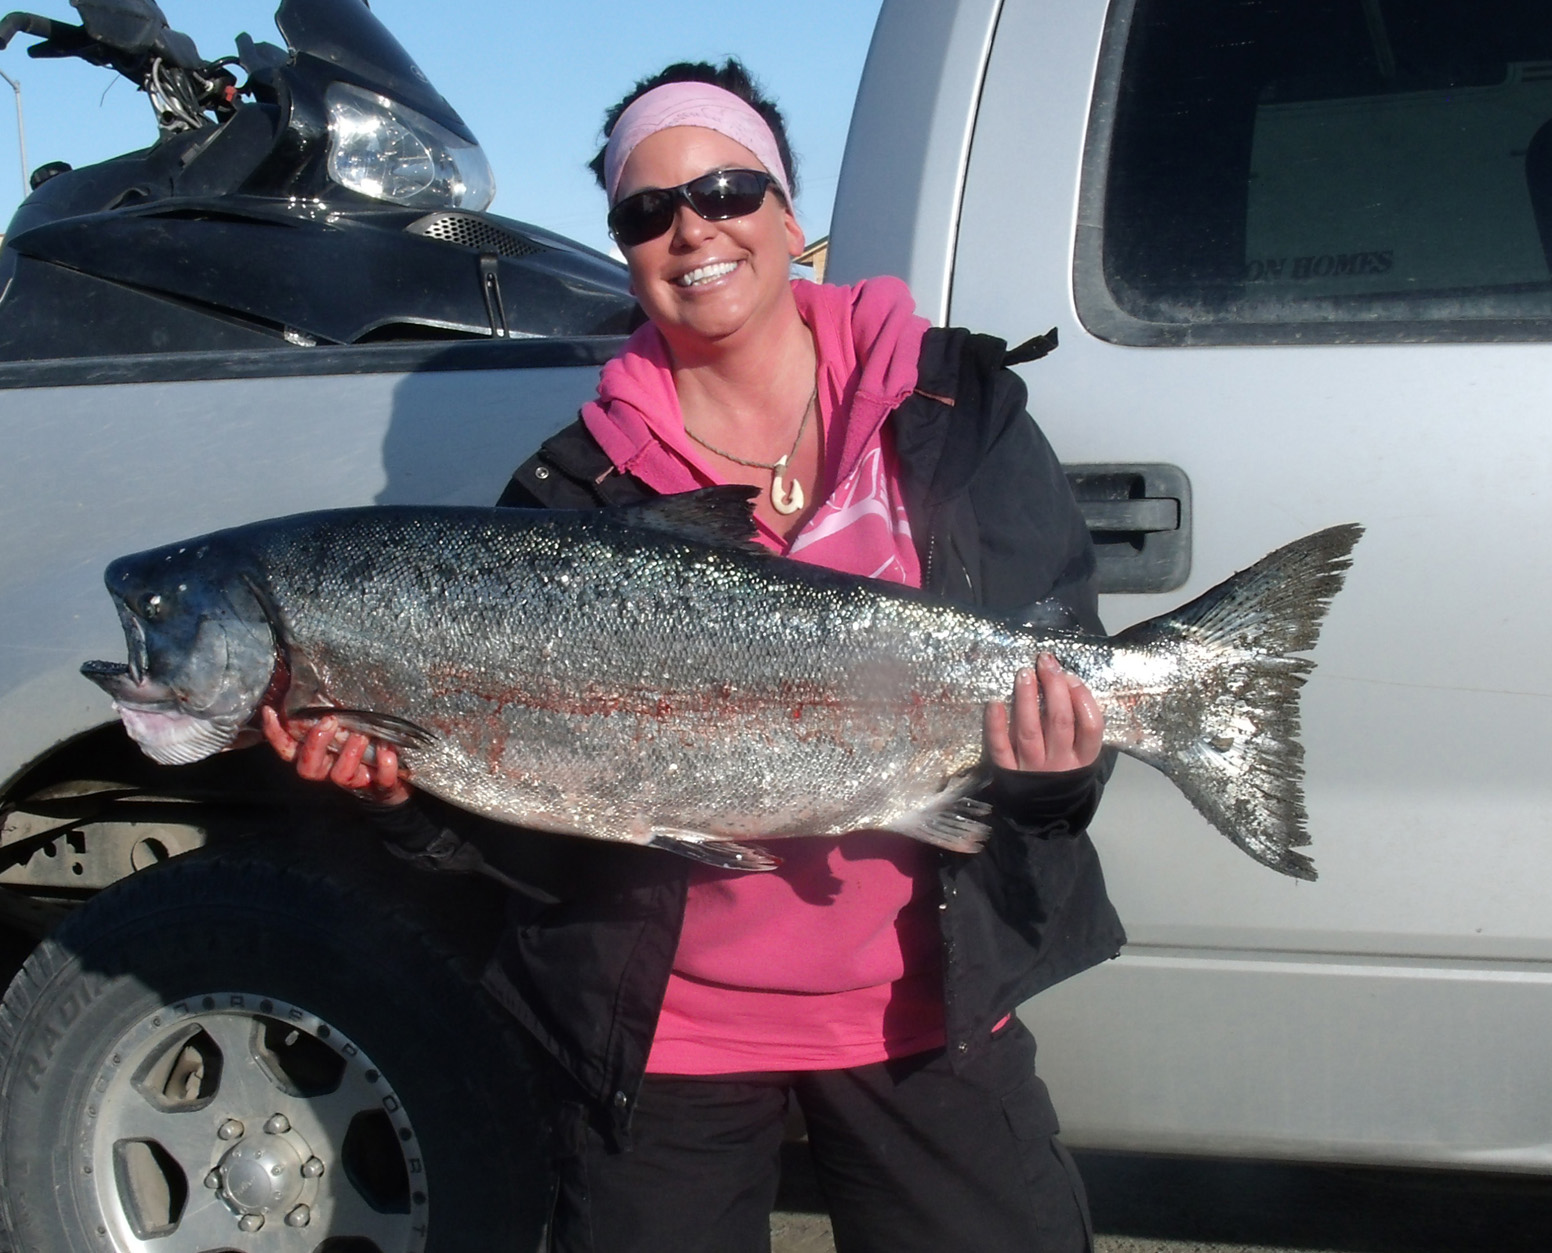 There’s good news for anglers lining up for Saturday’s 20th annual Winter King Salmon Tournament, sponsored by the Homer Chamber of Commerce and Visitor Center: Kings are being caught in Kachemak Bay.